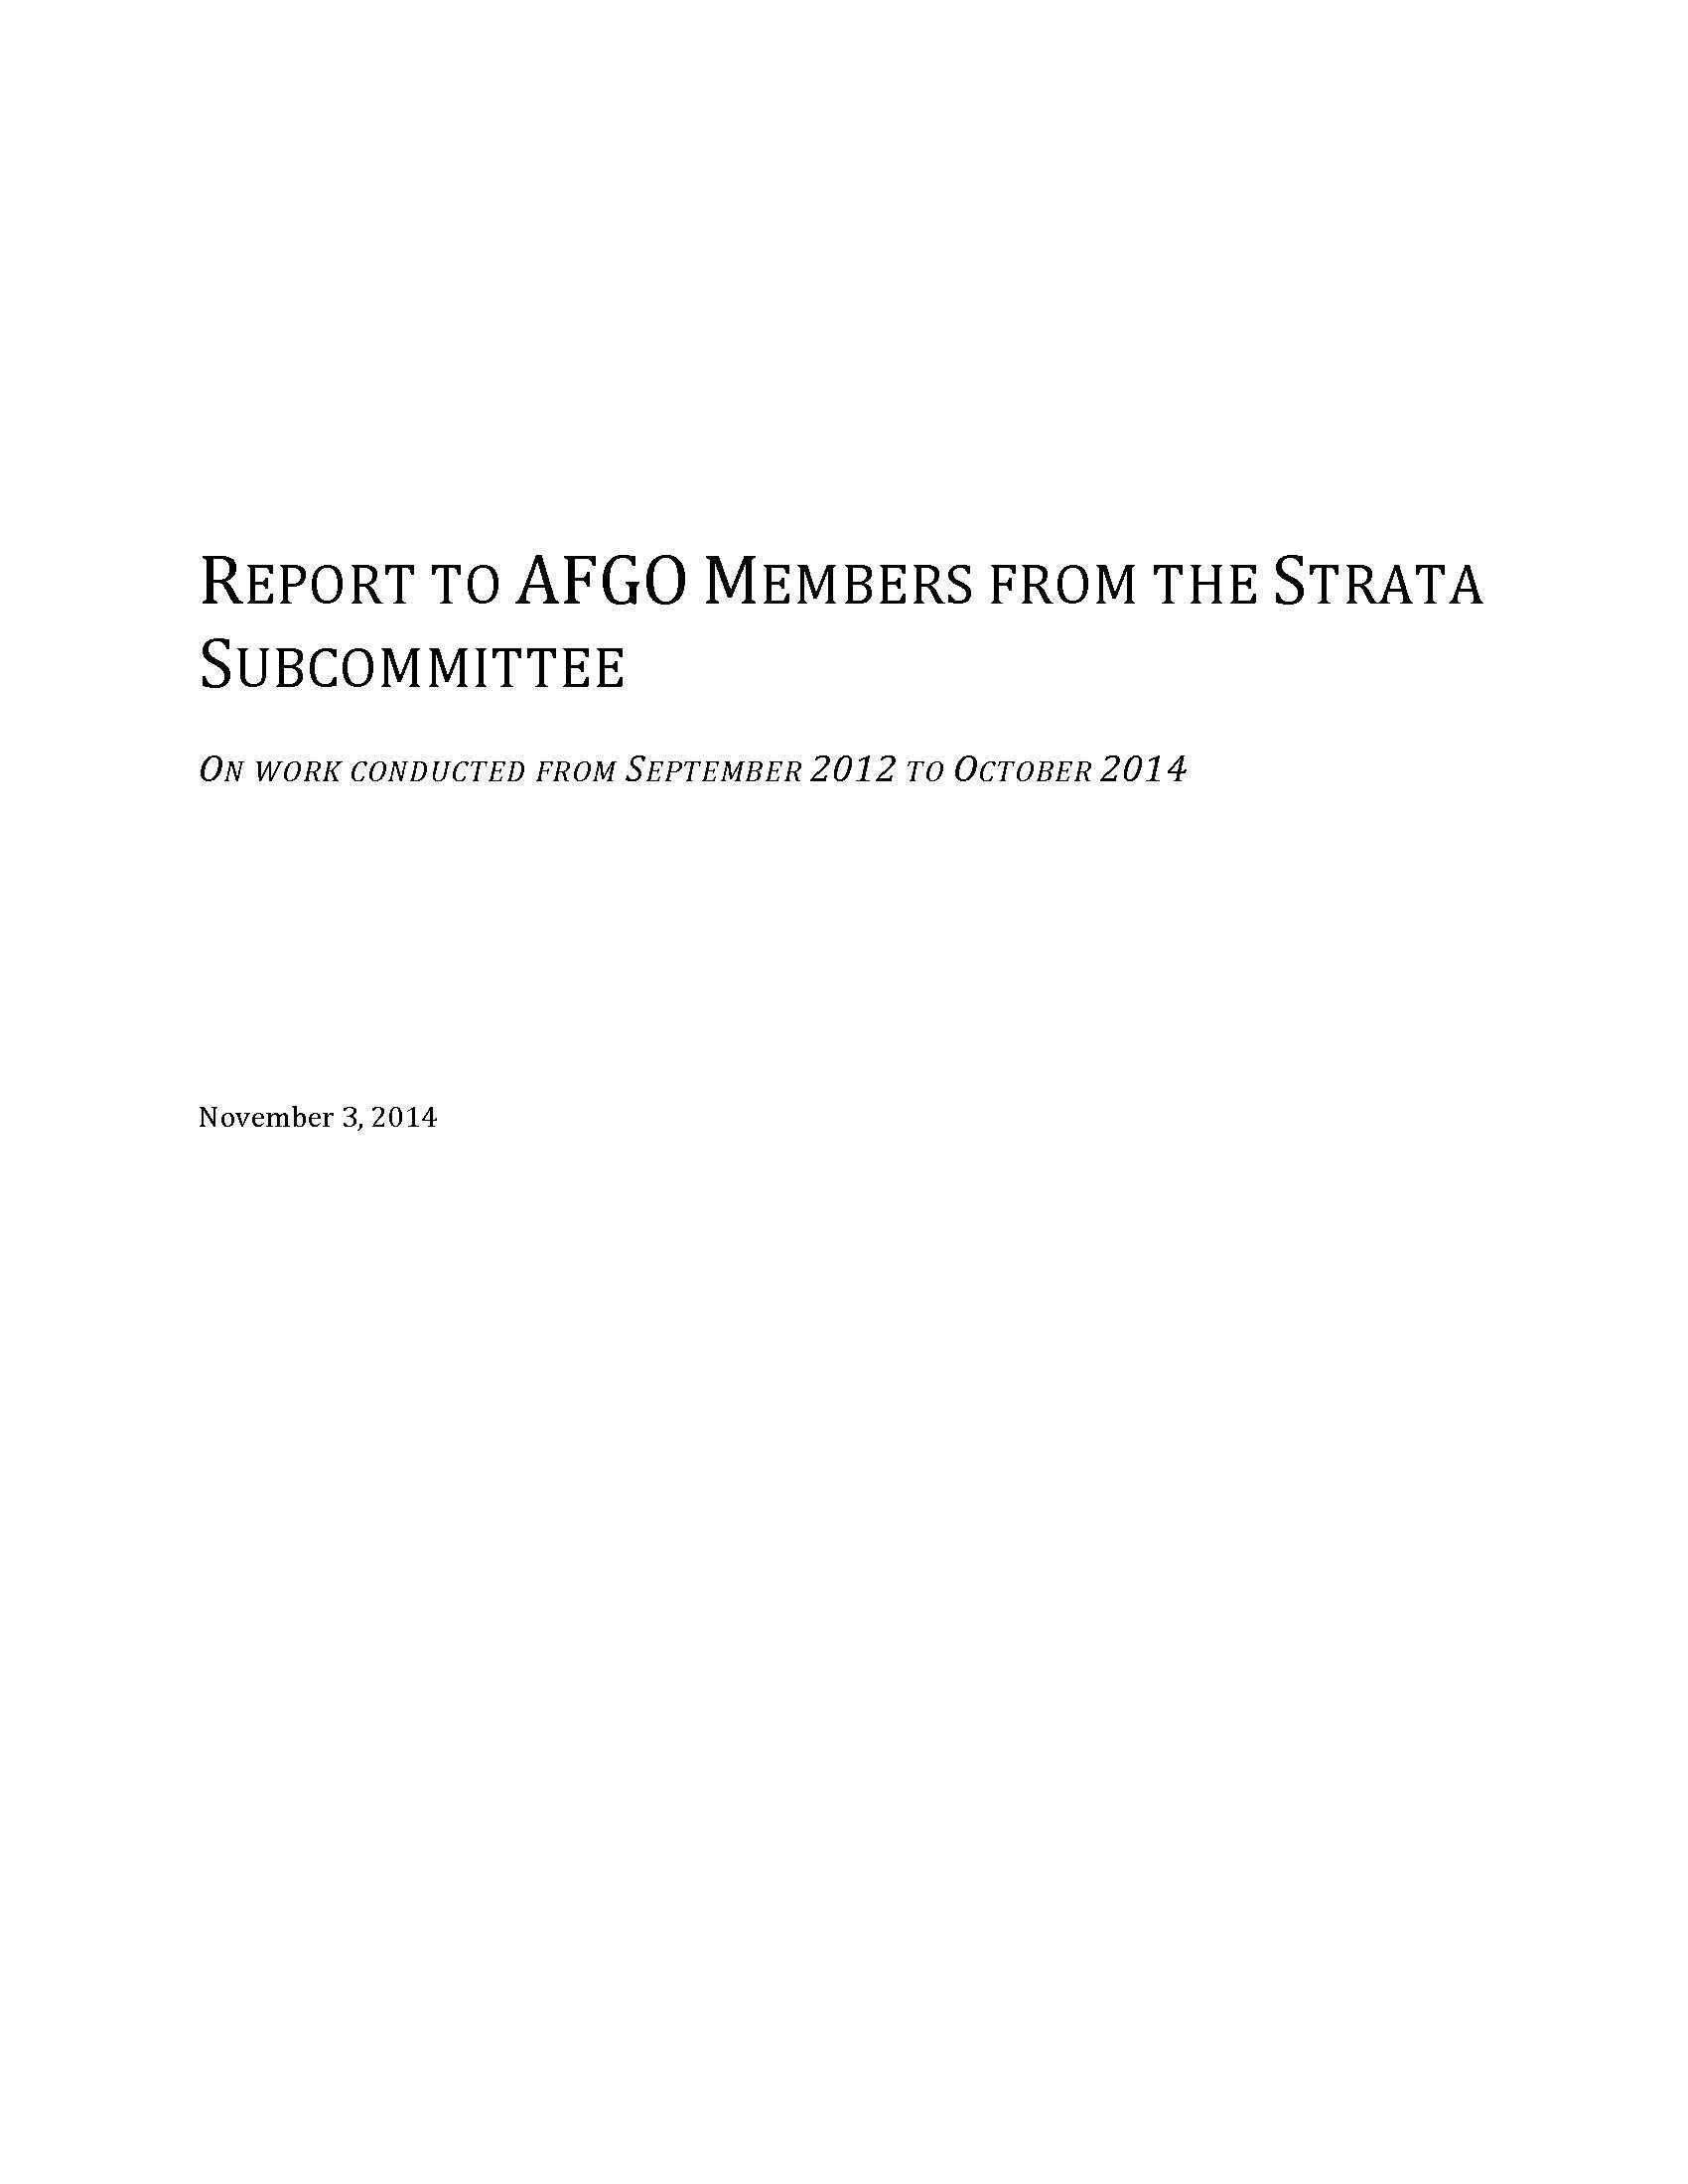 Report to AFGO Members from the Strata Subcommittee - On work conducted from September 2012 to October 2014